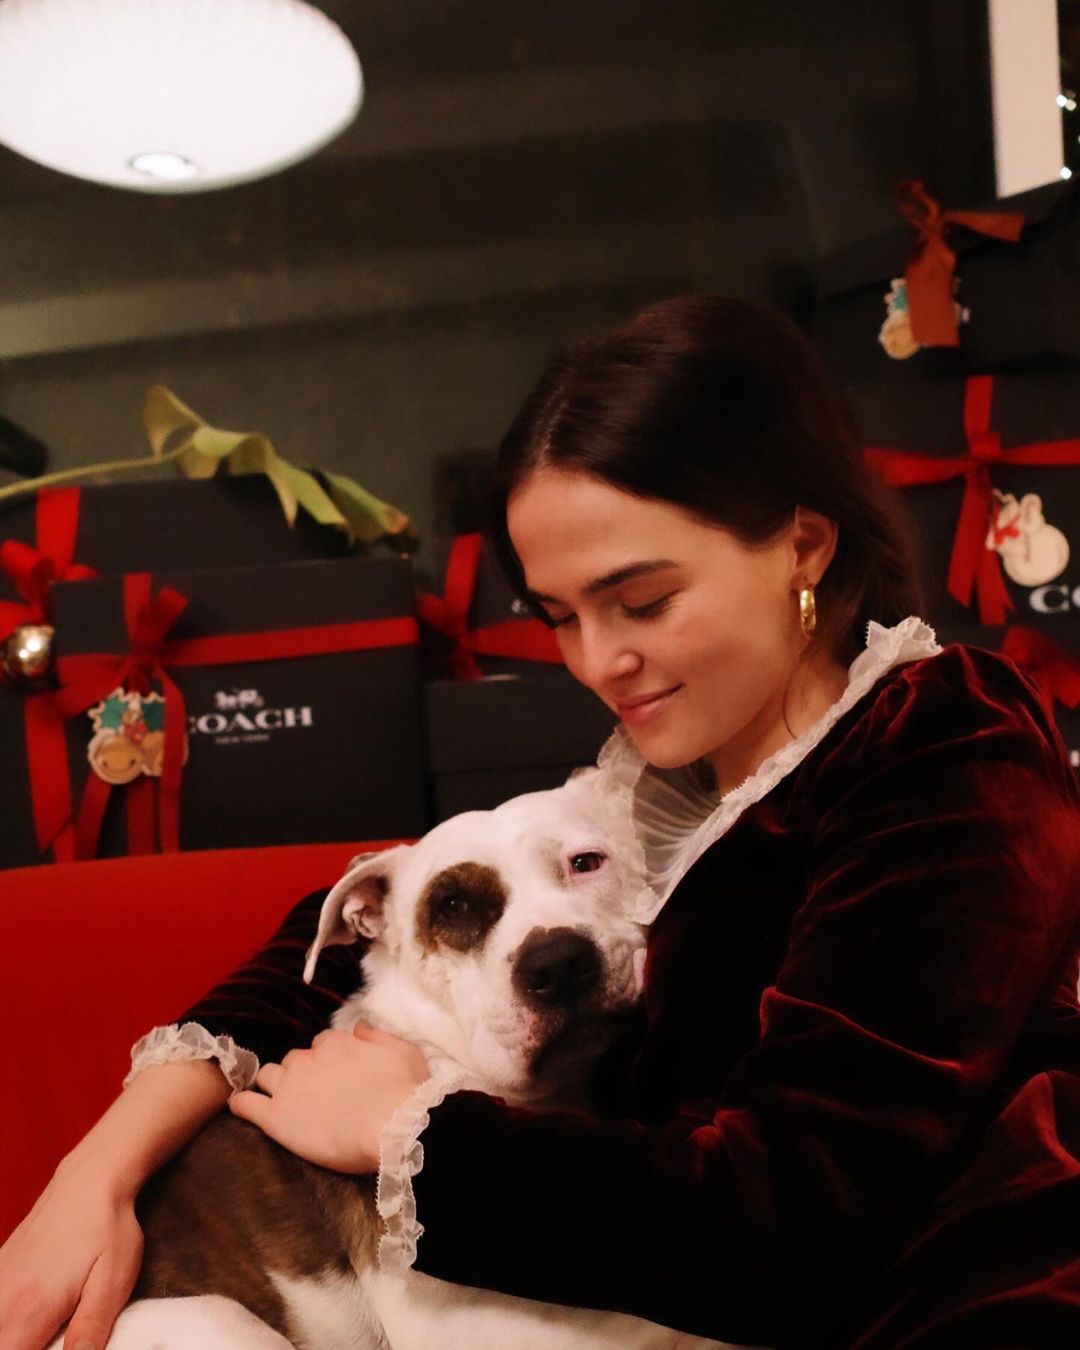 Photos n°2 : Zoey Deutch Keeps Things Chill This Holiday Season!